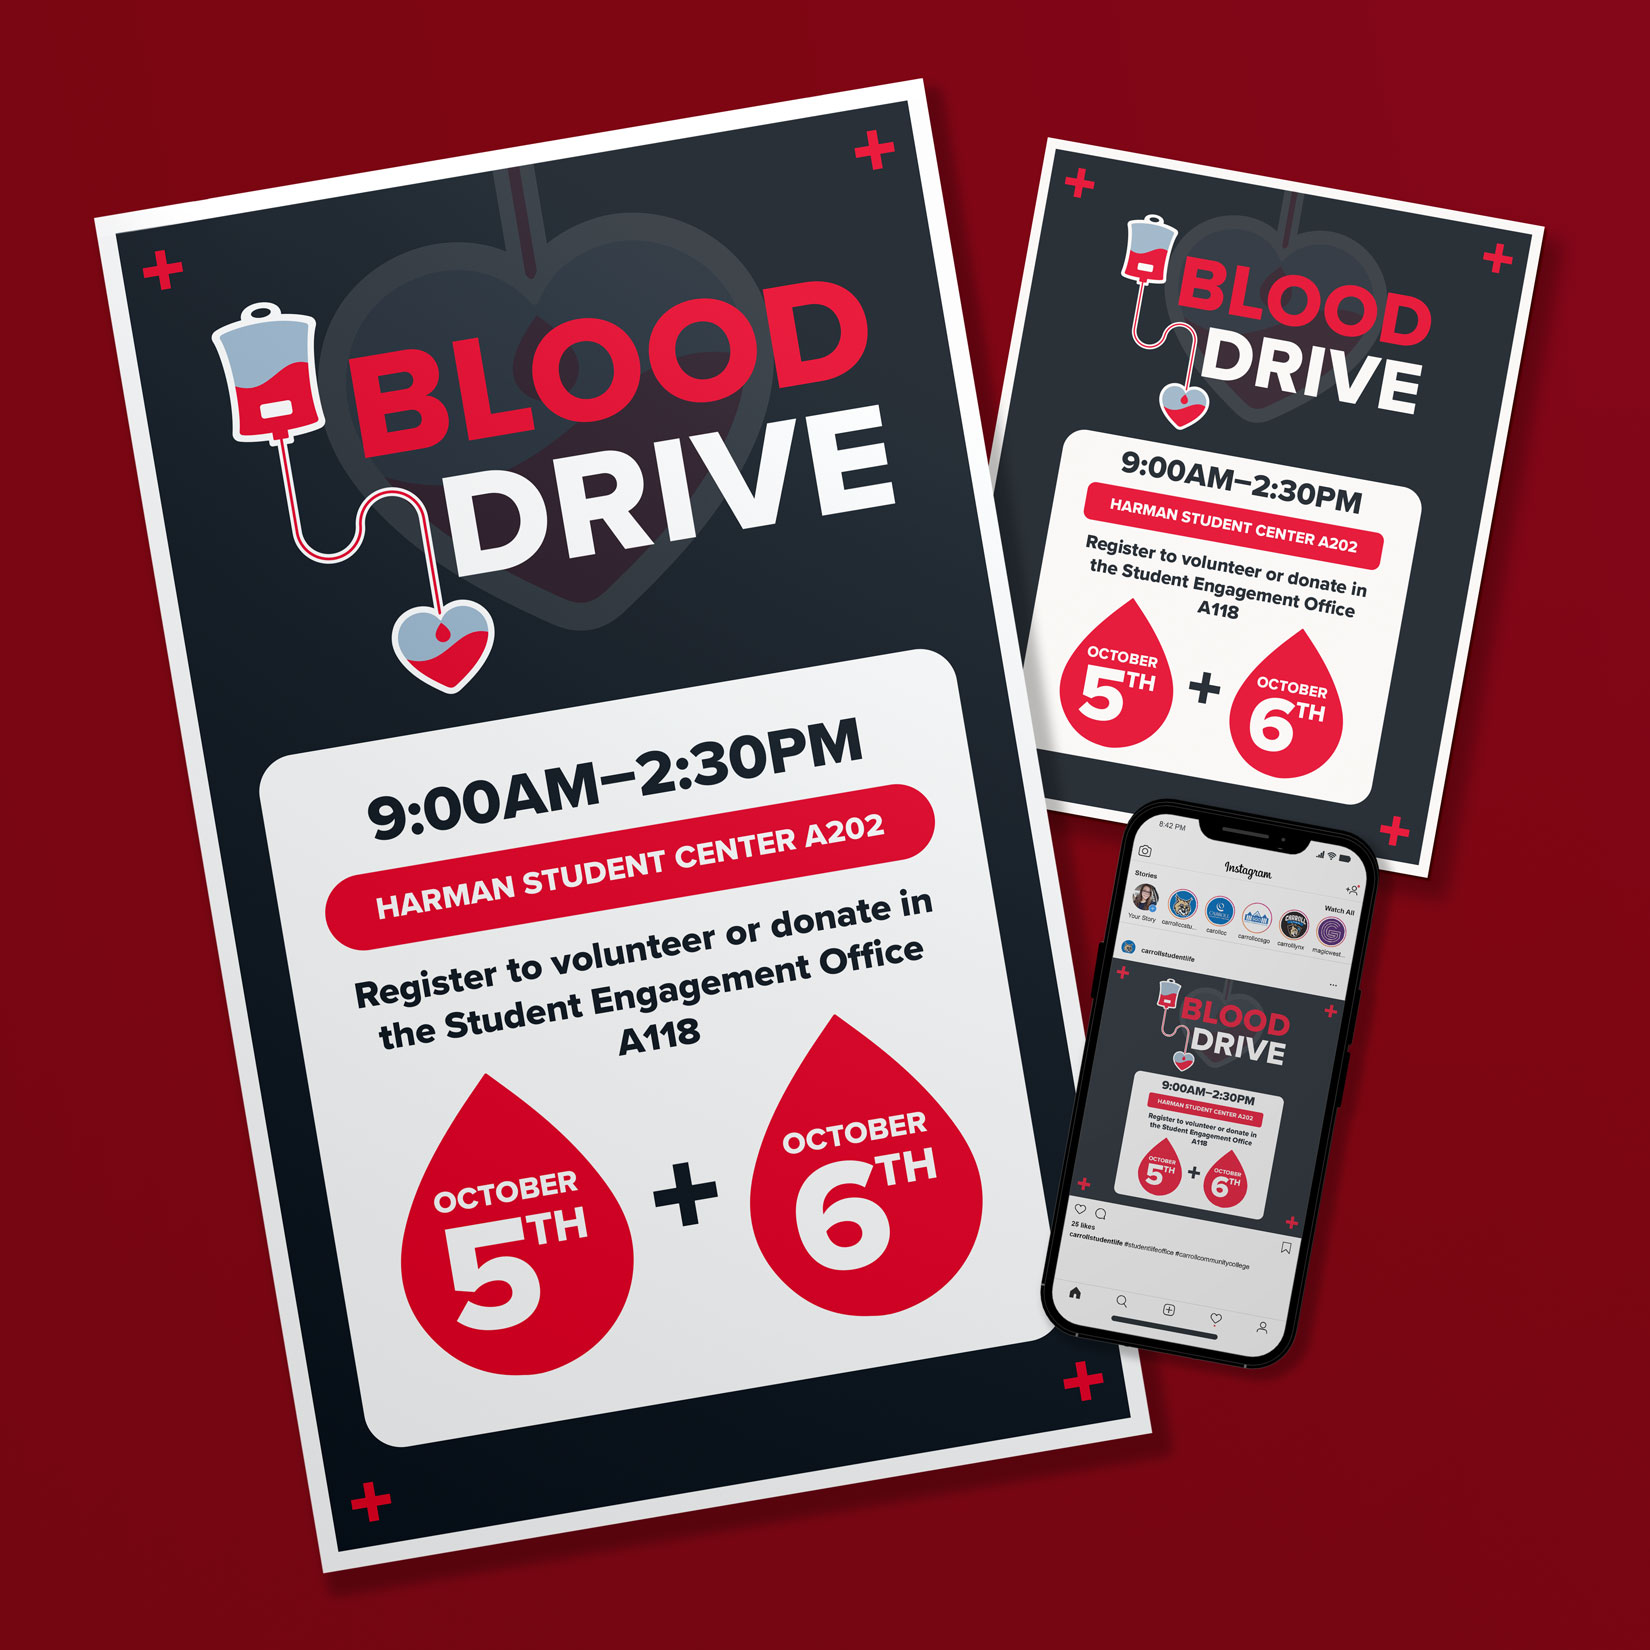 Poster, flyer, and social media post of a blood drive